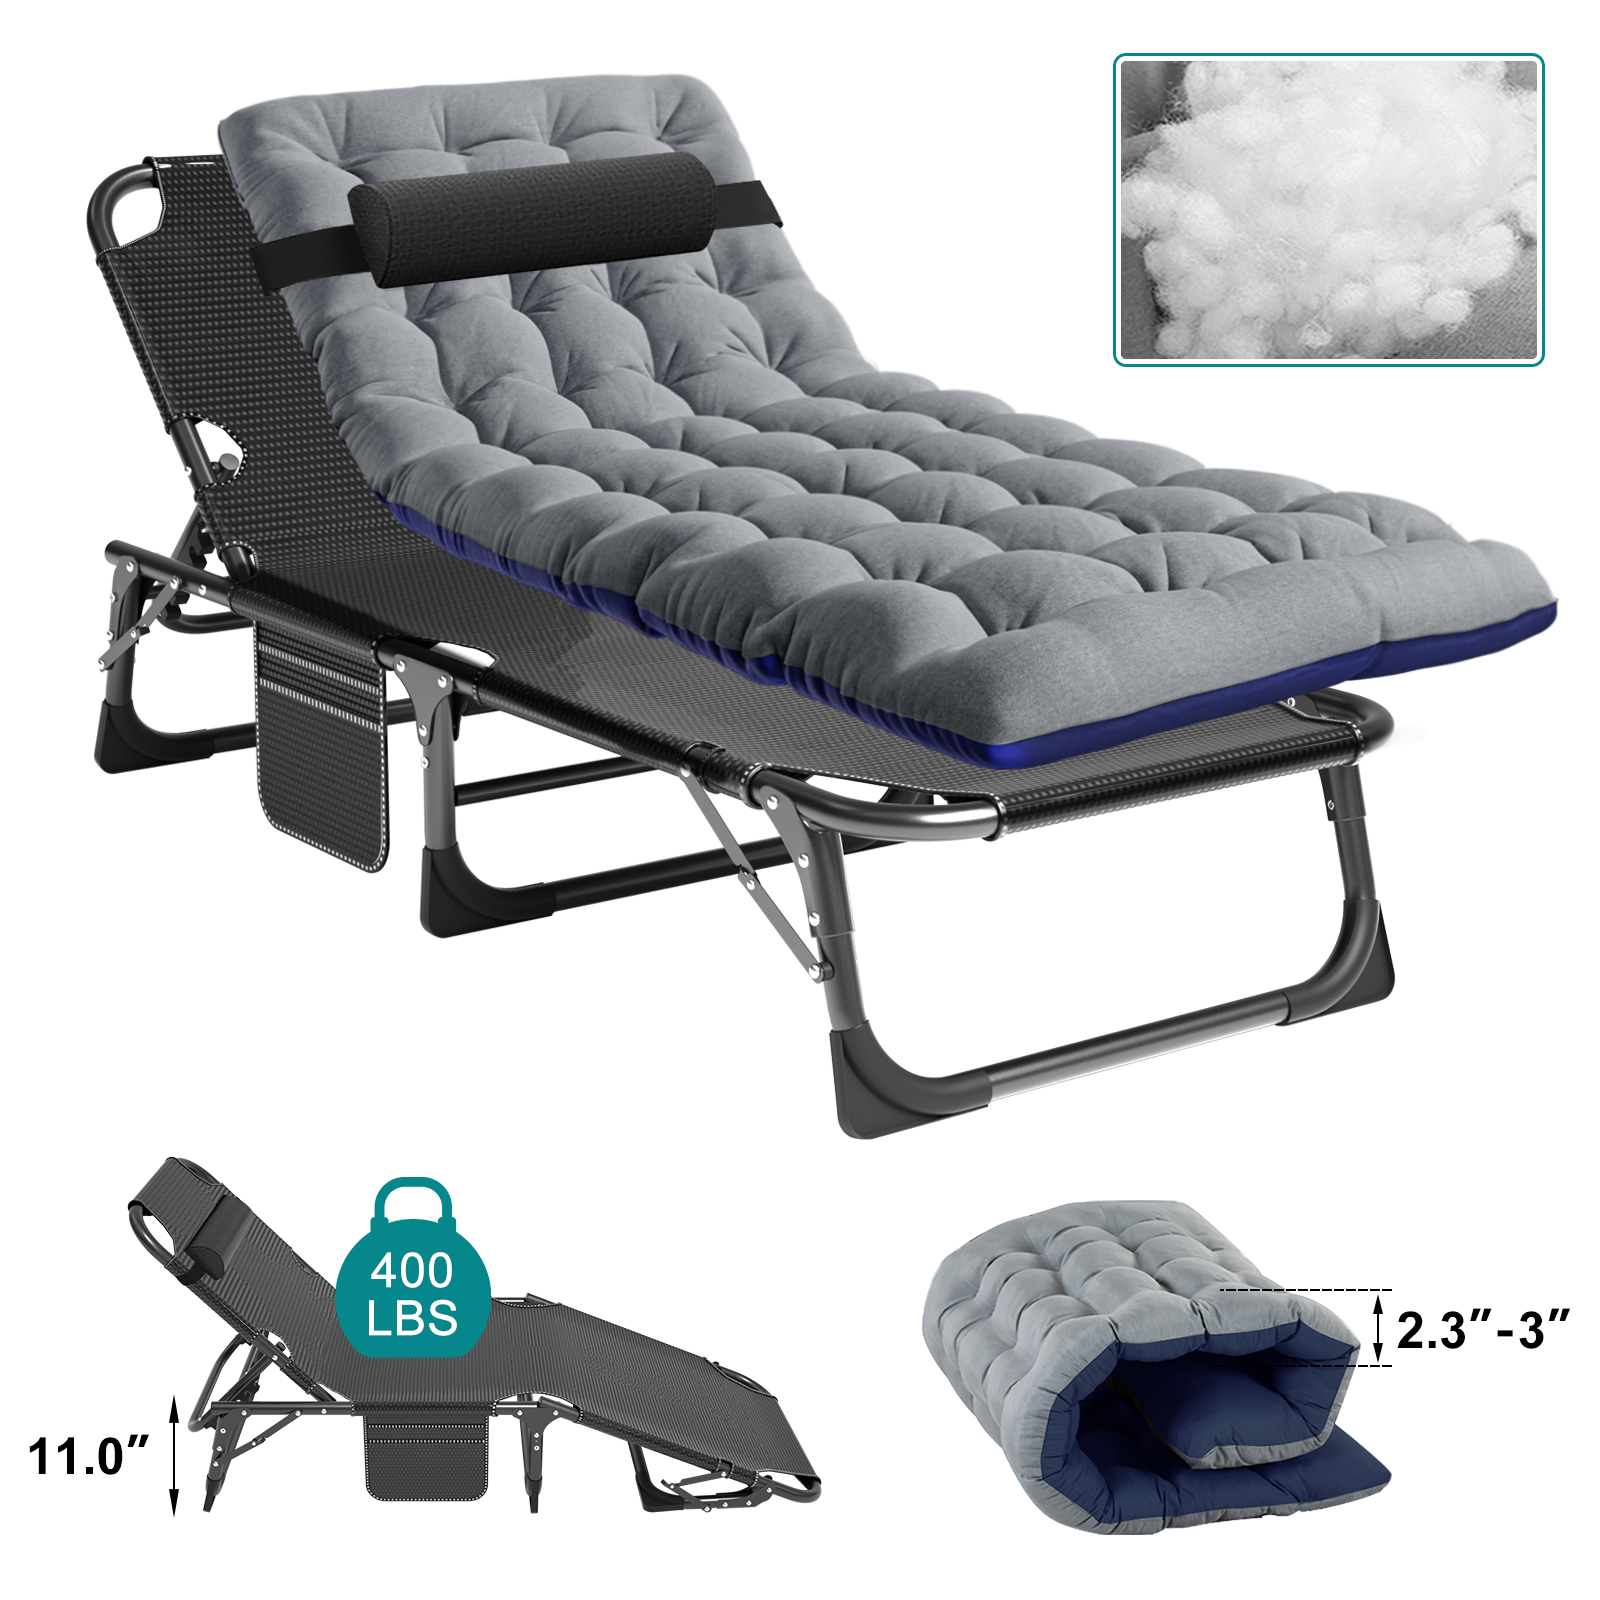 Lilypelle Portable Folding Camping Cot Bed with 2 Sided Mattress & Pillow, Adjustable 5-Position Folding Lounge Chair, Folding Cot Bed - image 1 of 9